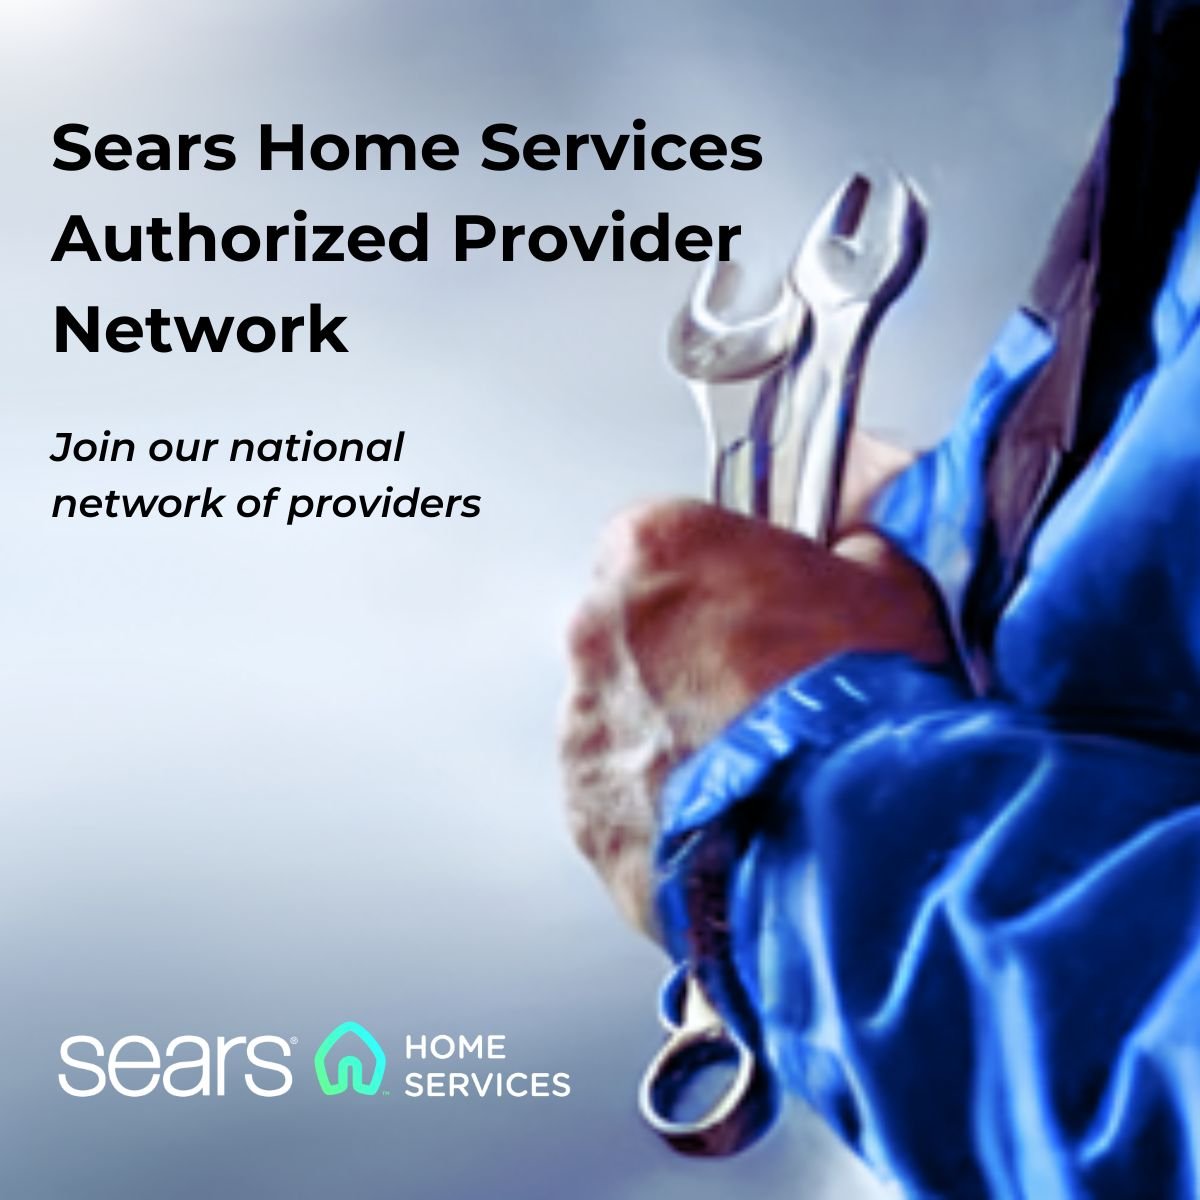 Have expertise in #appliancerepair, #HVAC, #roofing, #windows, #doors, #siding, #electrical or #plumbing?  Is your business looking for a partner to supplement your income?

If you answered YES, apply to the #SearsHomeServices Authorized Provider Network - bit.ly/3W5xy3o